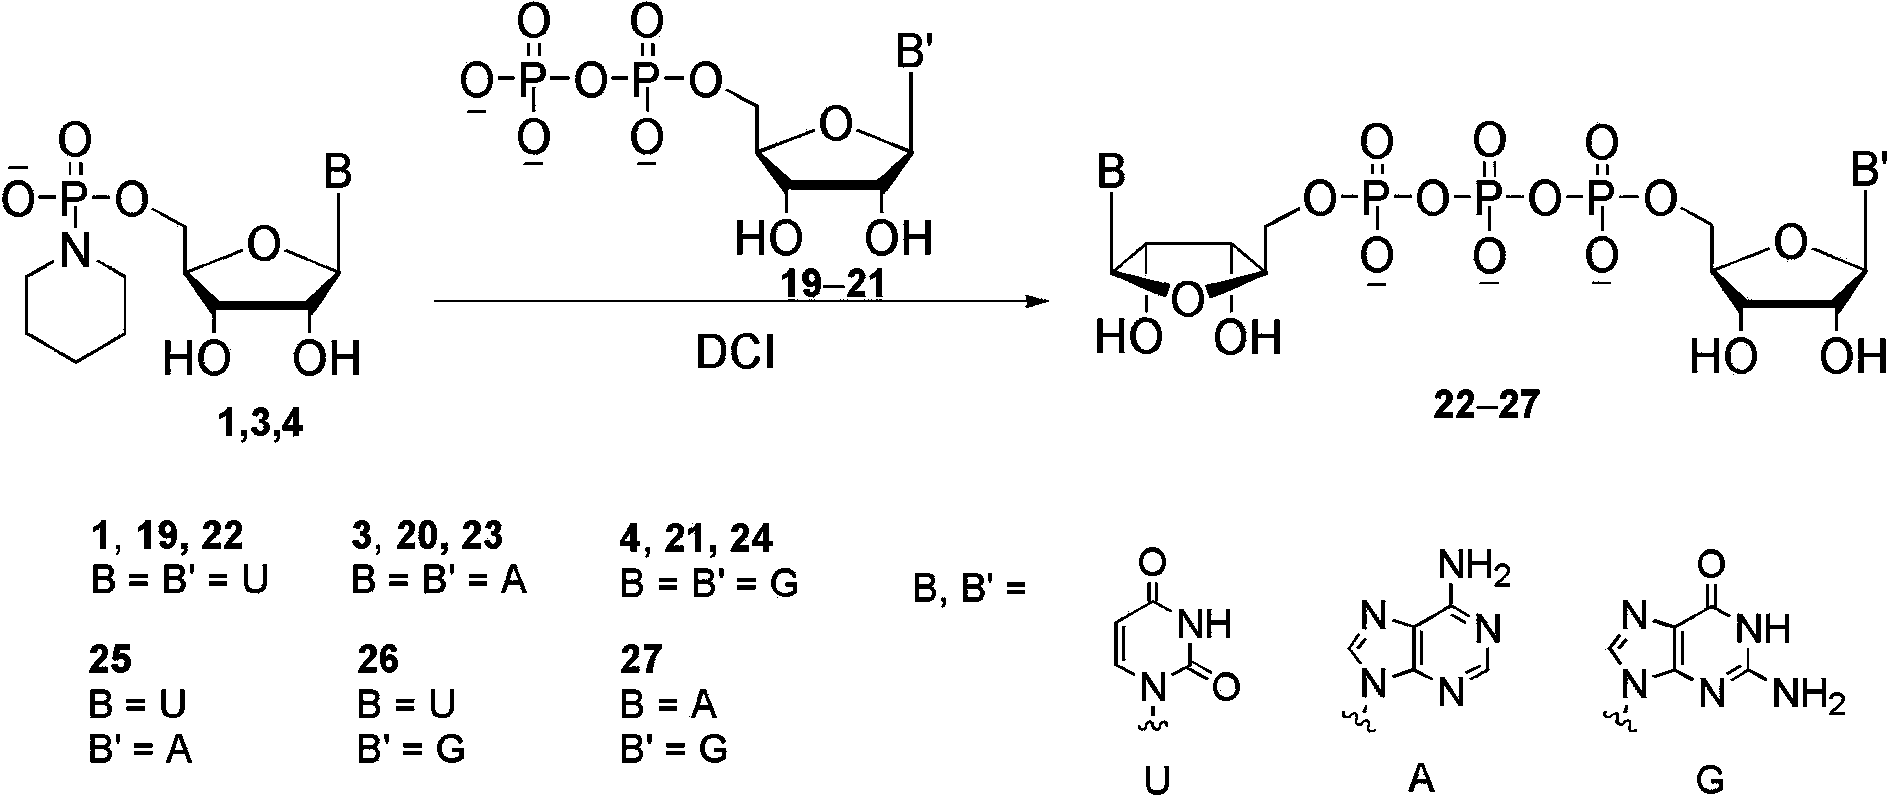 Method for synthesizing dinucleoside diphosphate and dinucleoside triphosphote